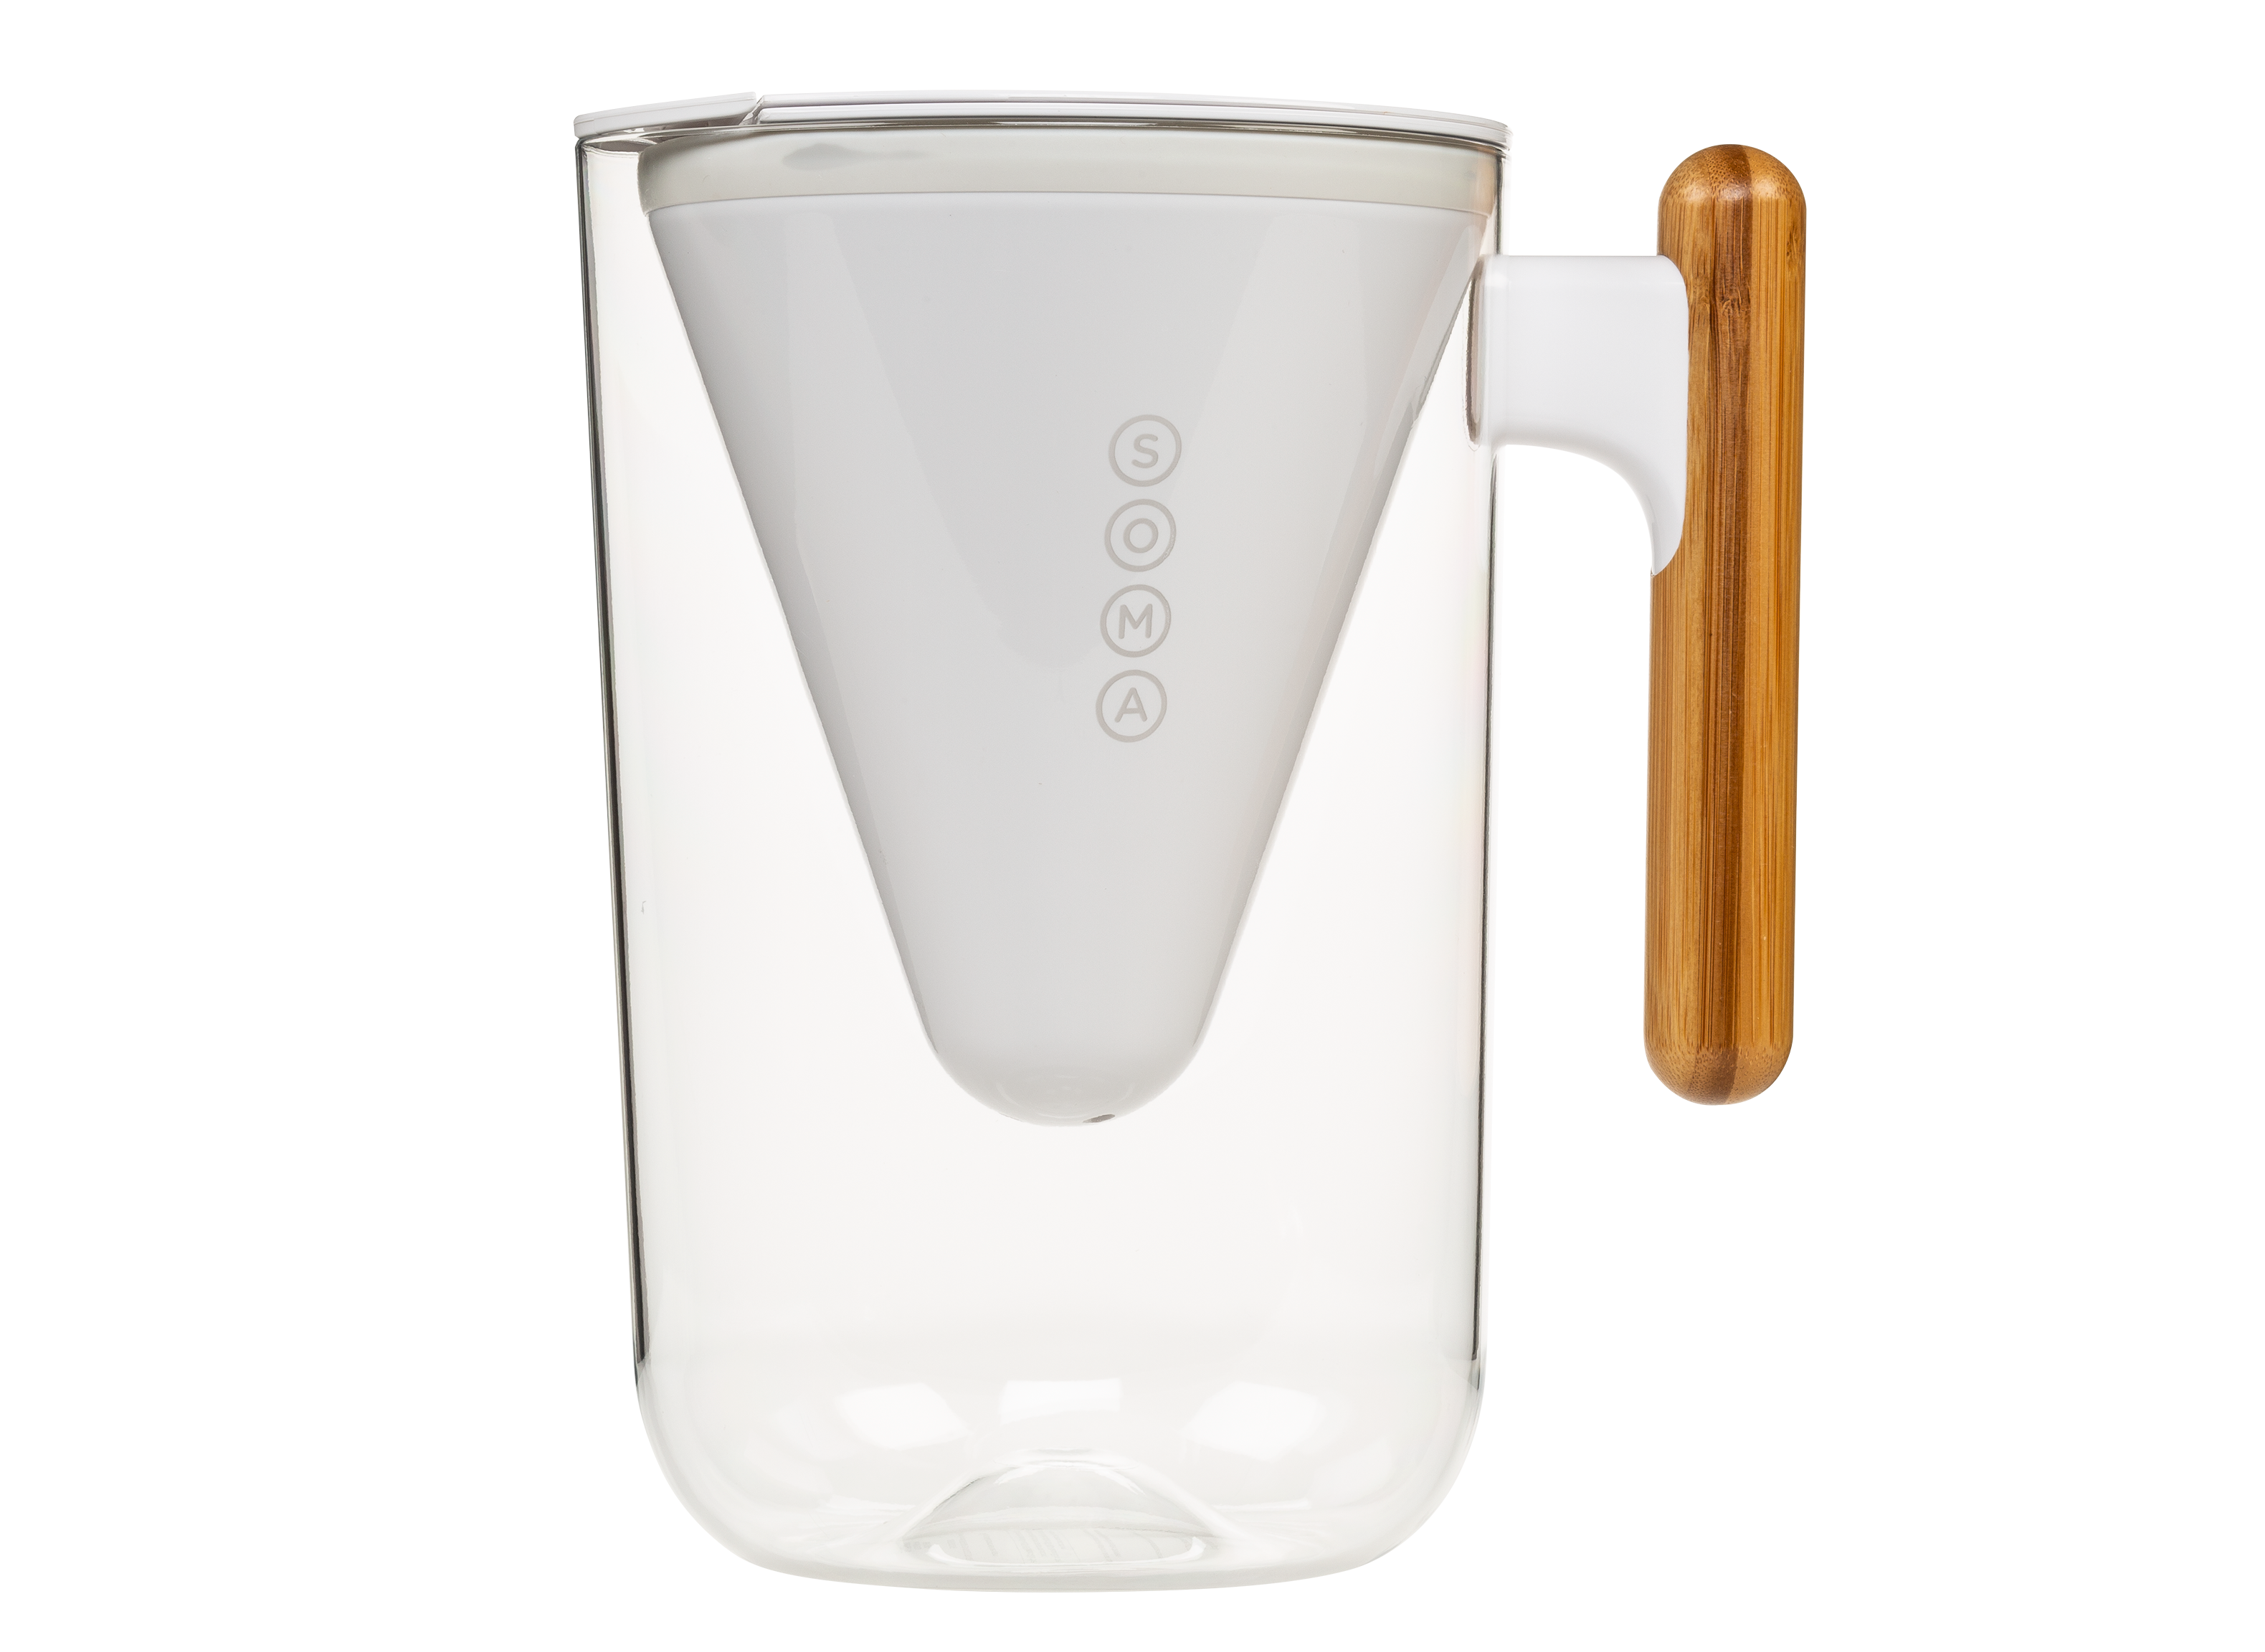 The Soma Pitcher